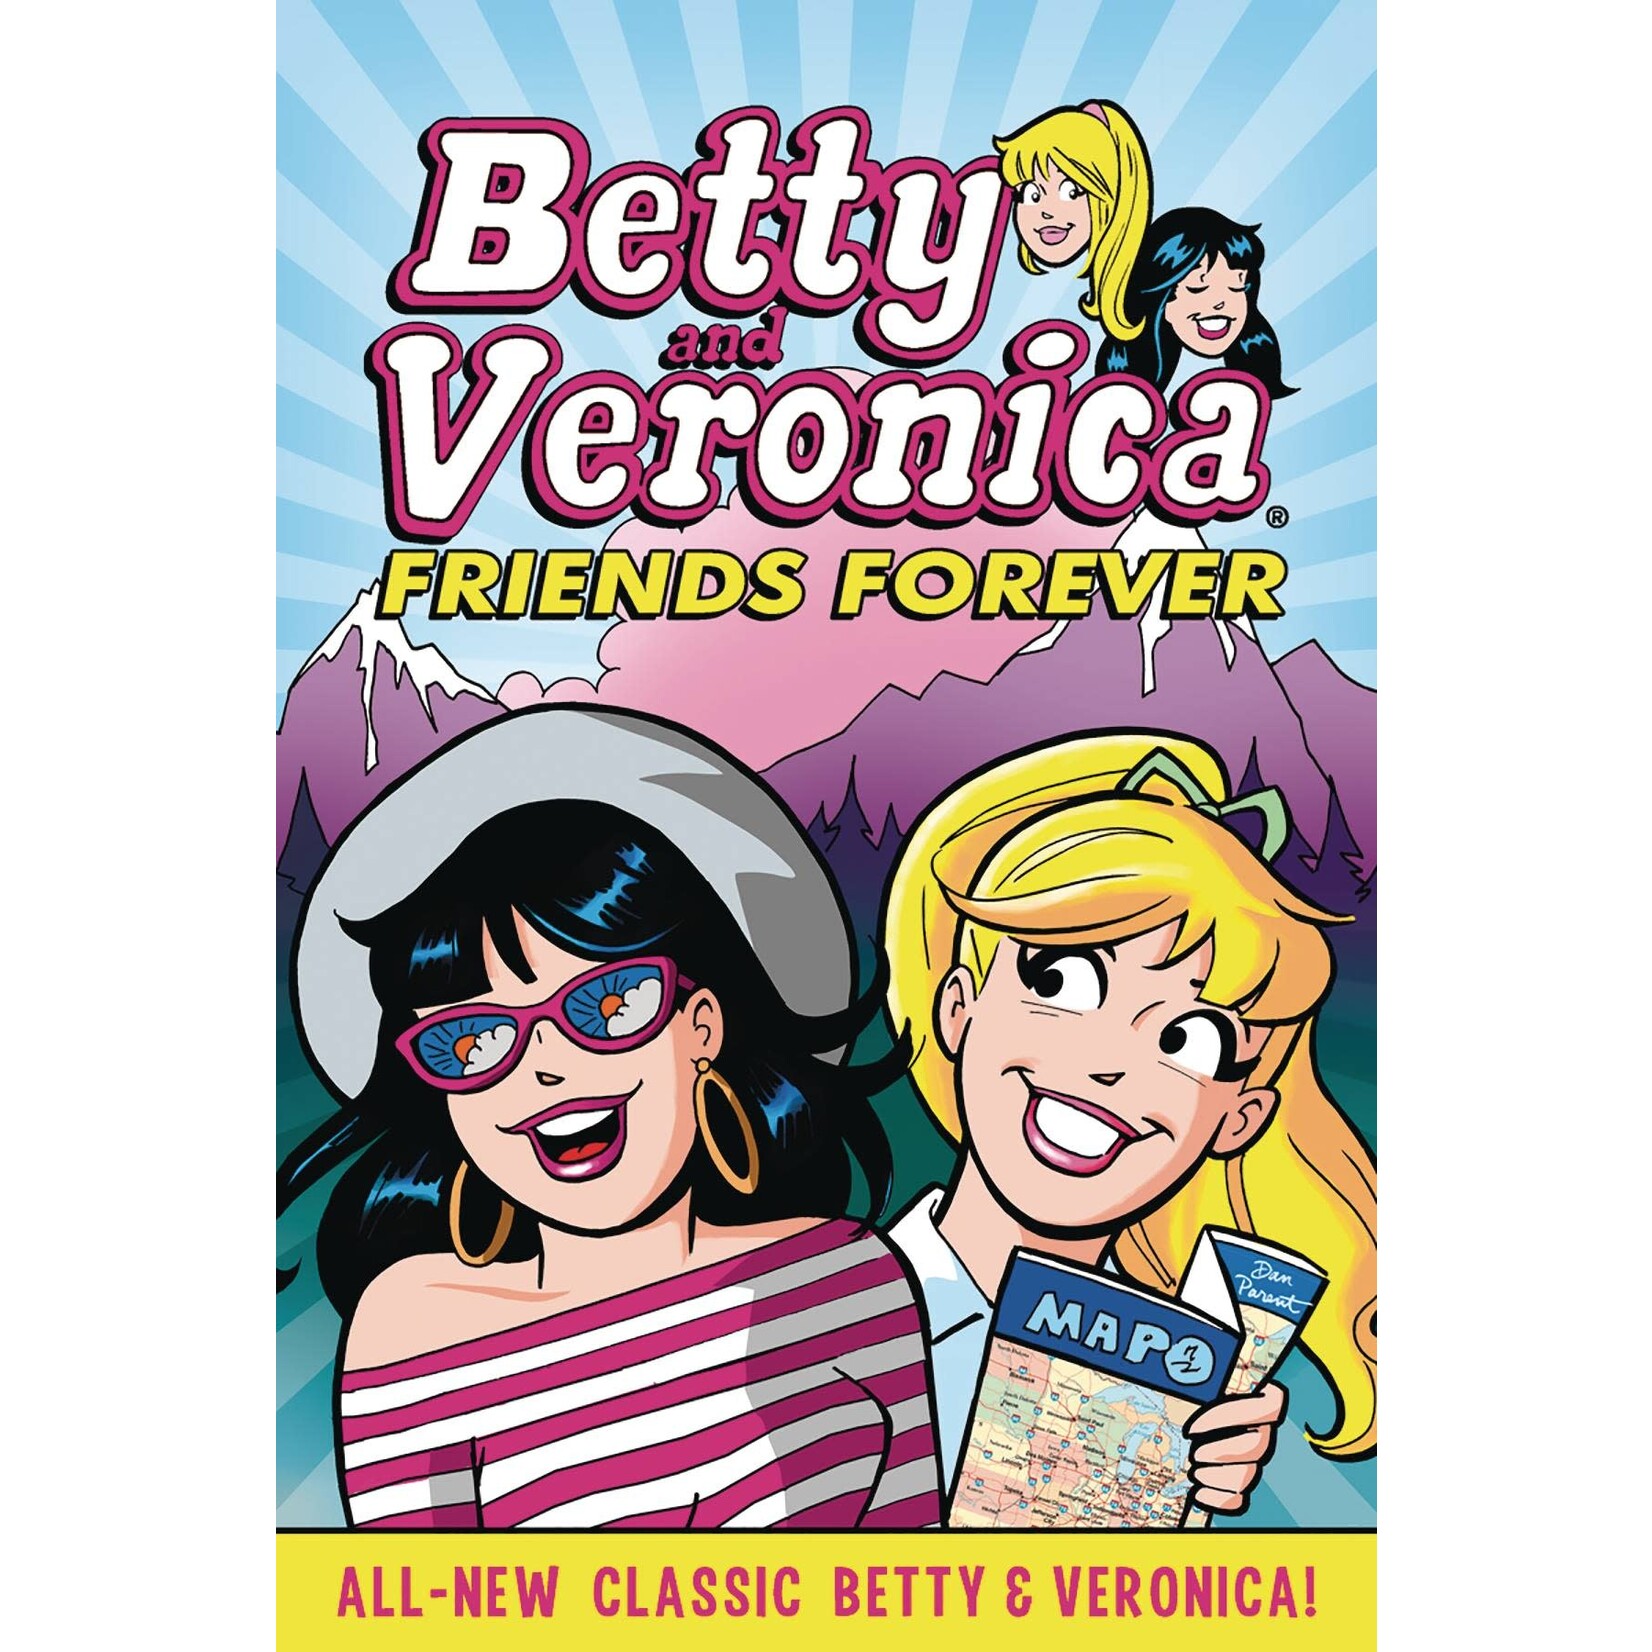 Betty & Veronica Friends Forever TP